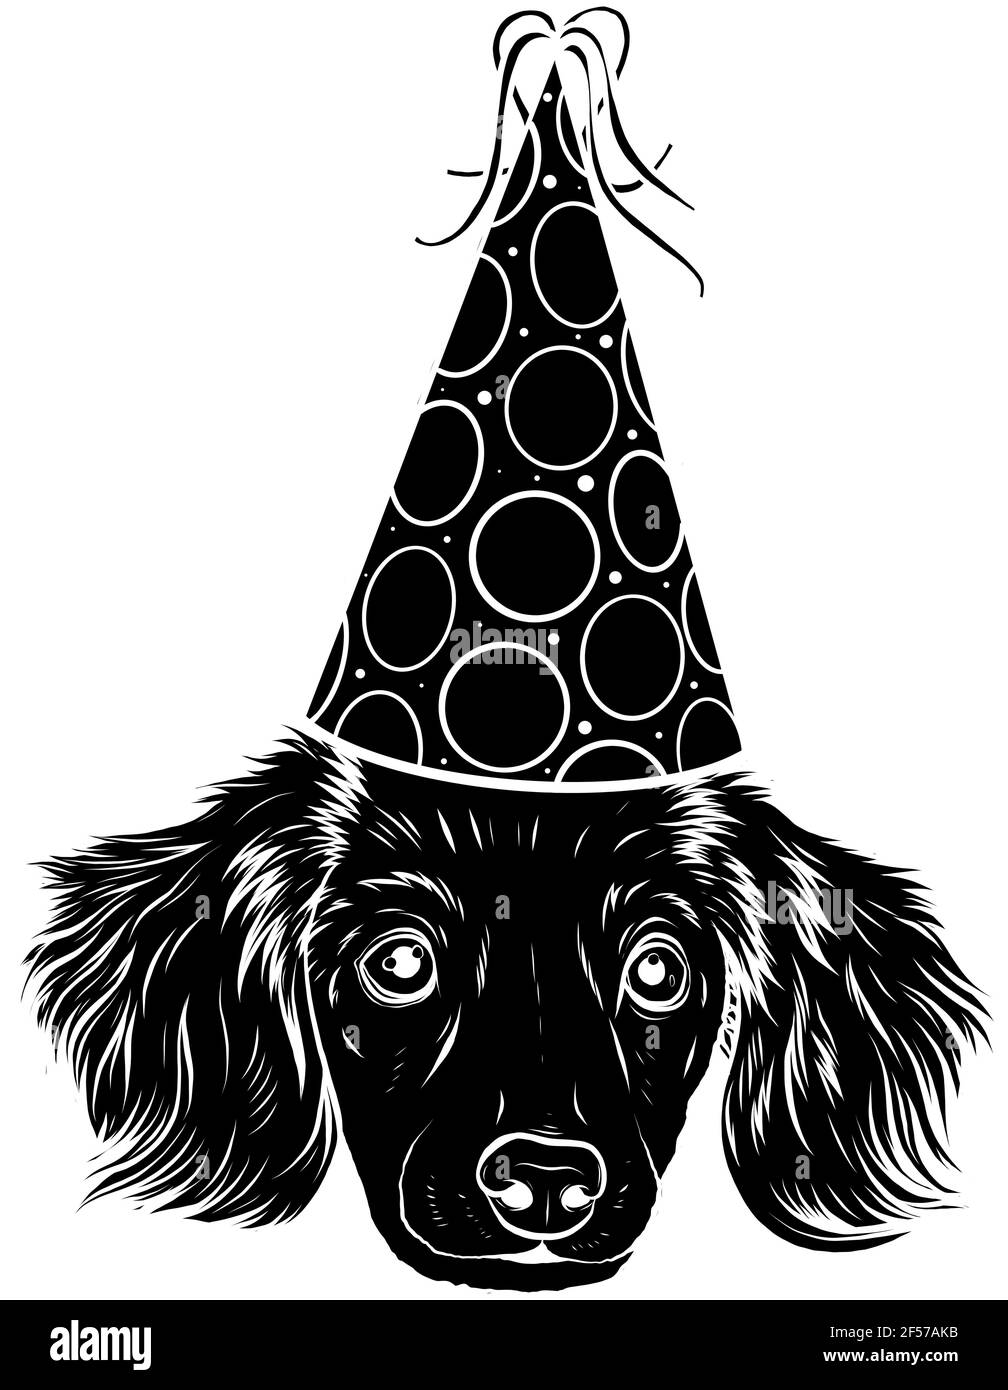 black silhouette of A cute head puppy with party hat Stock Vector